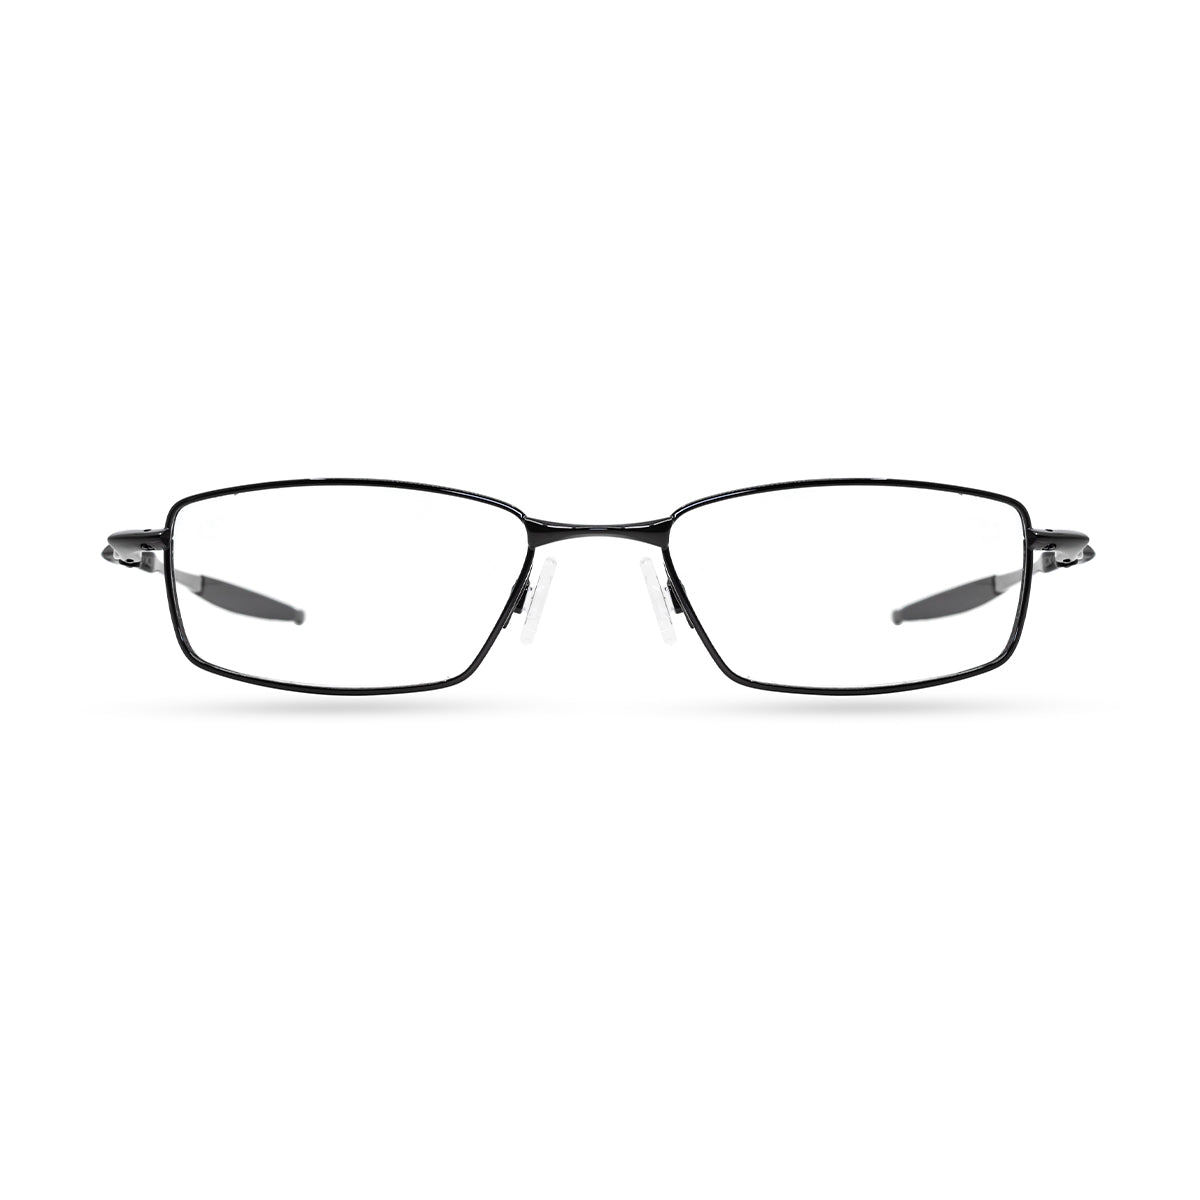 OAKLEY OX3131 02 spectacle-frame